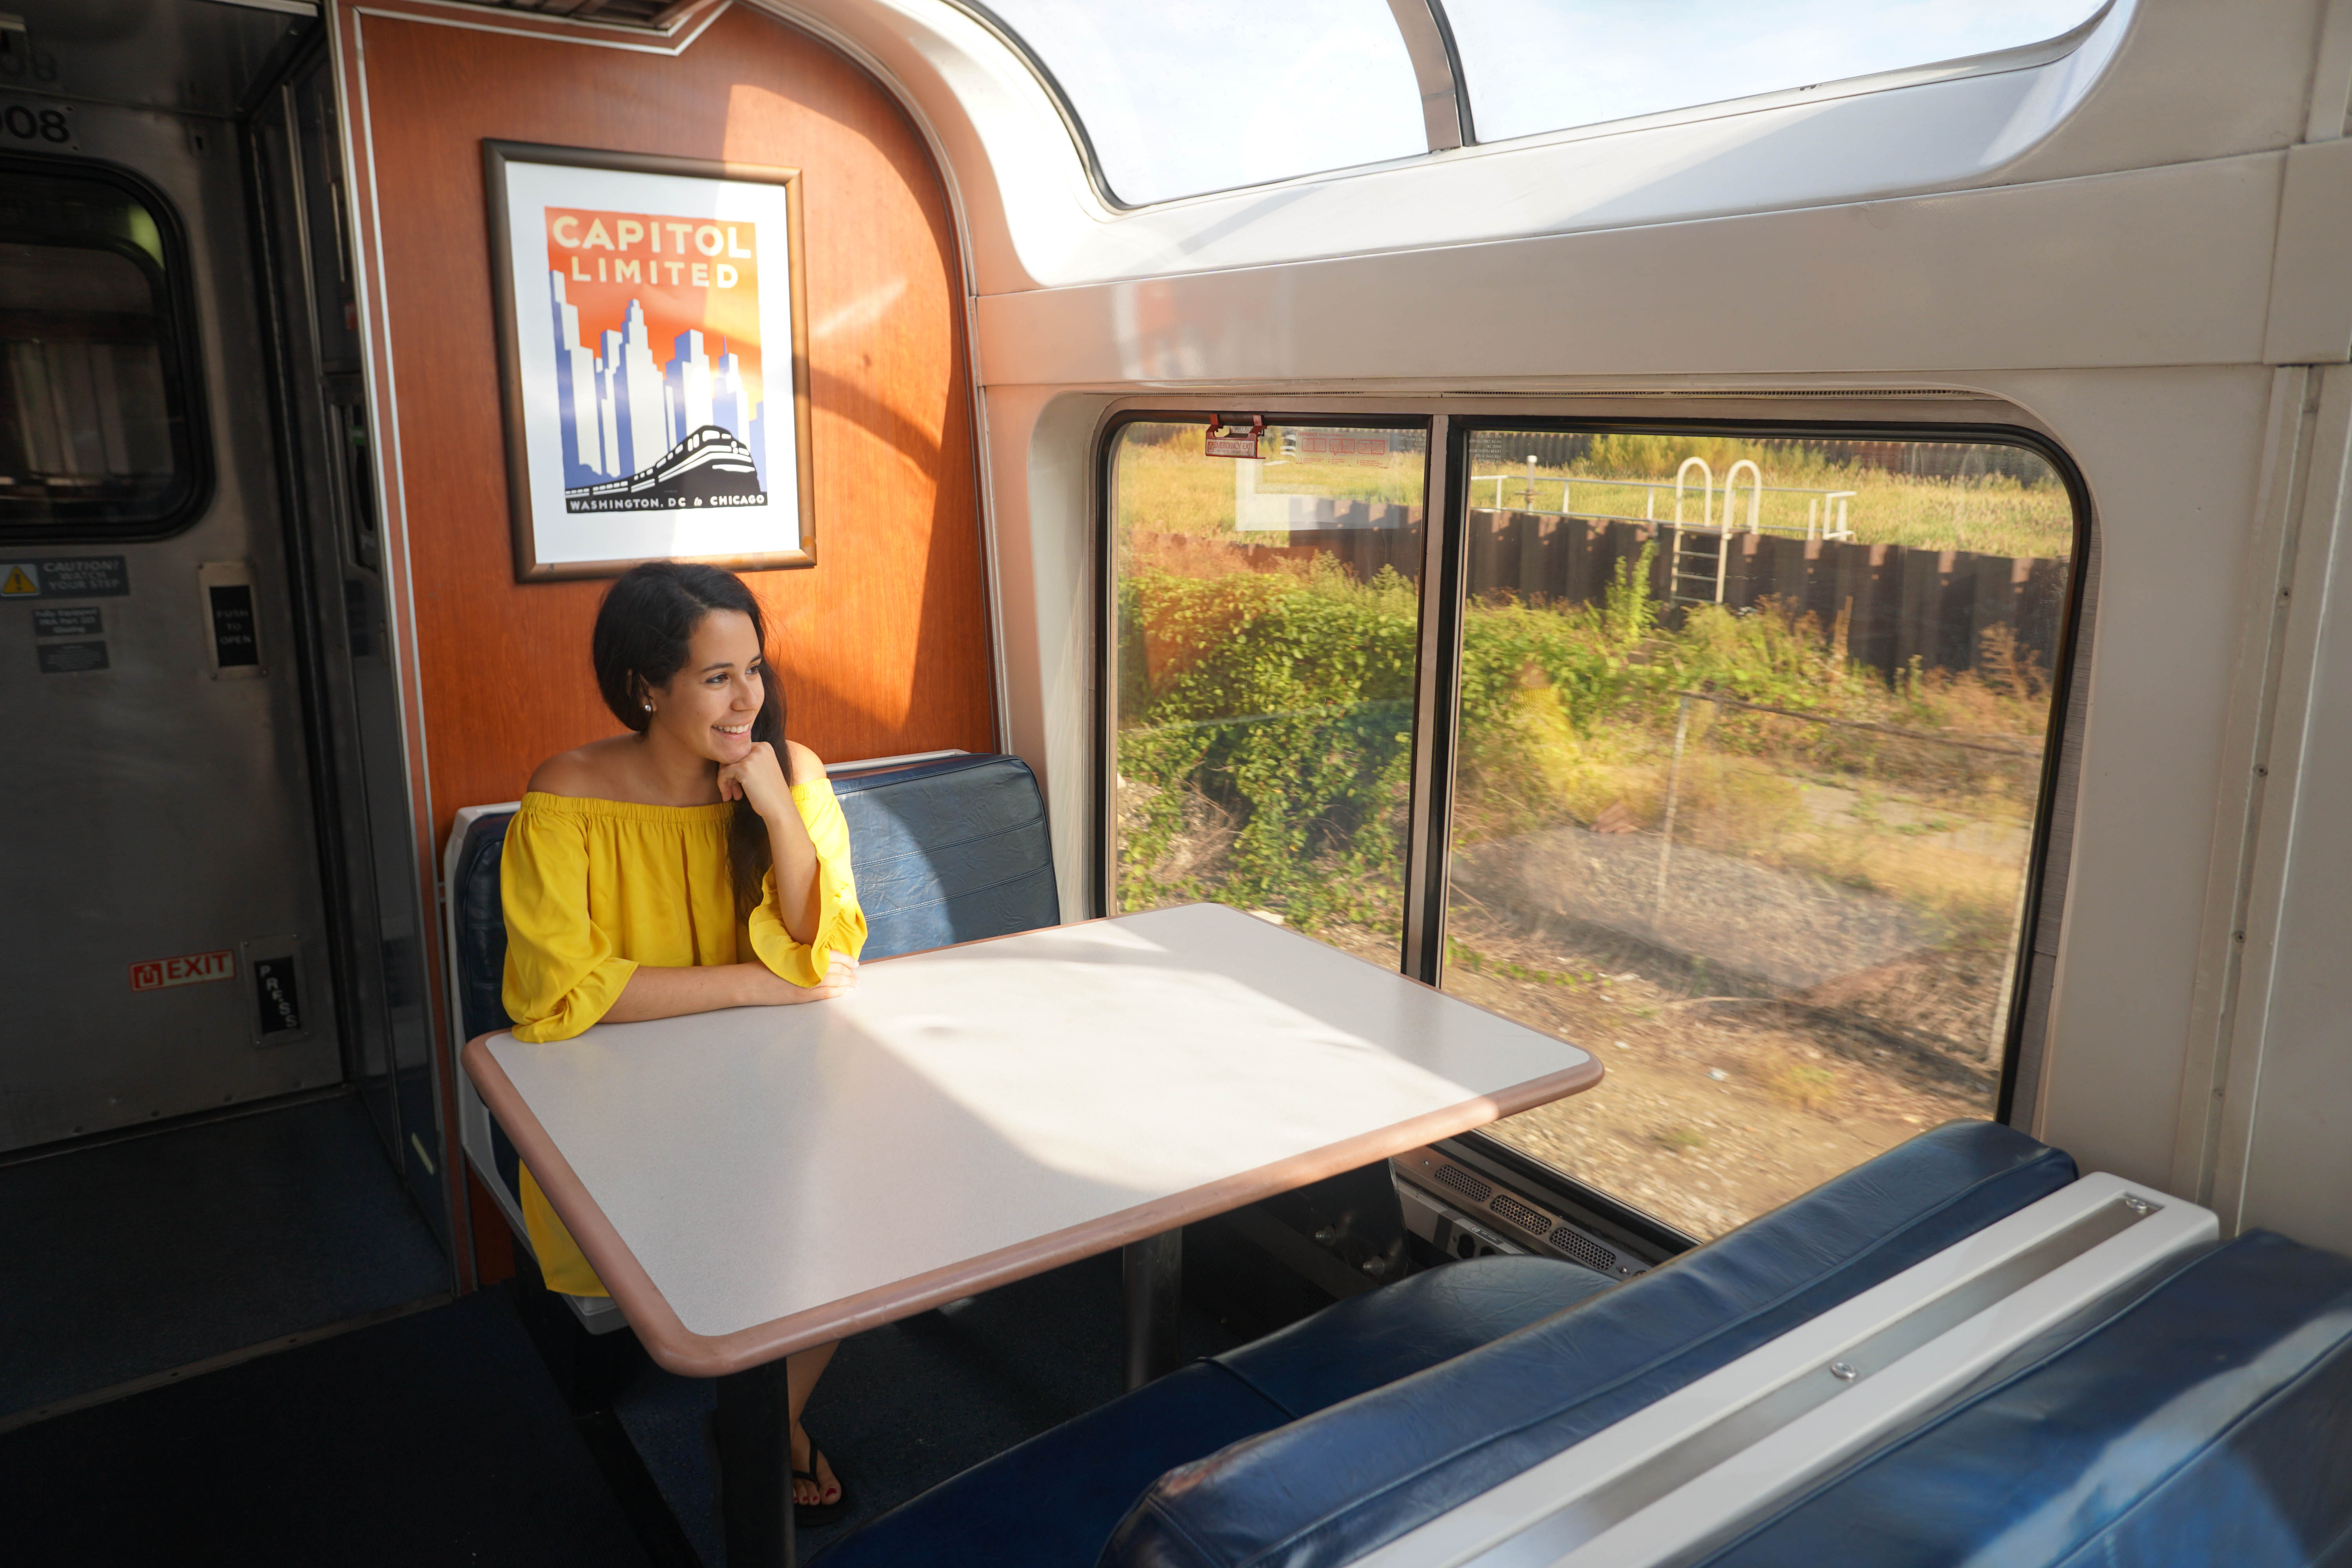 Capitol Limited poster at table with woman looking out window